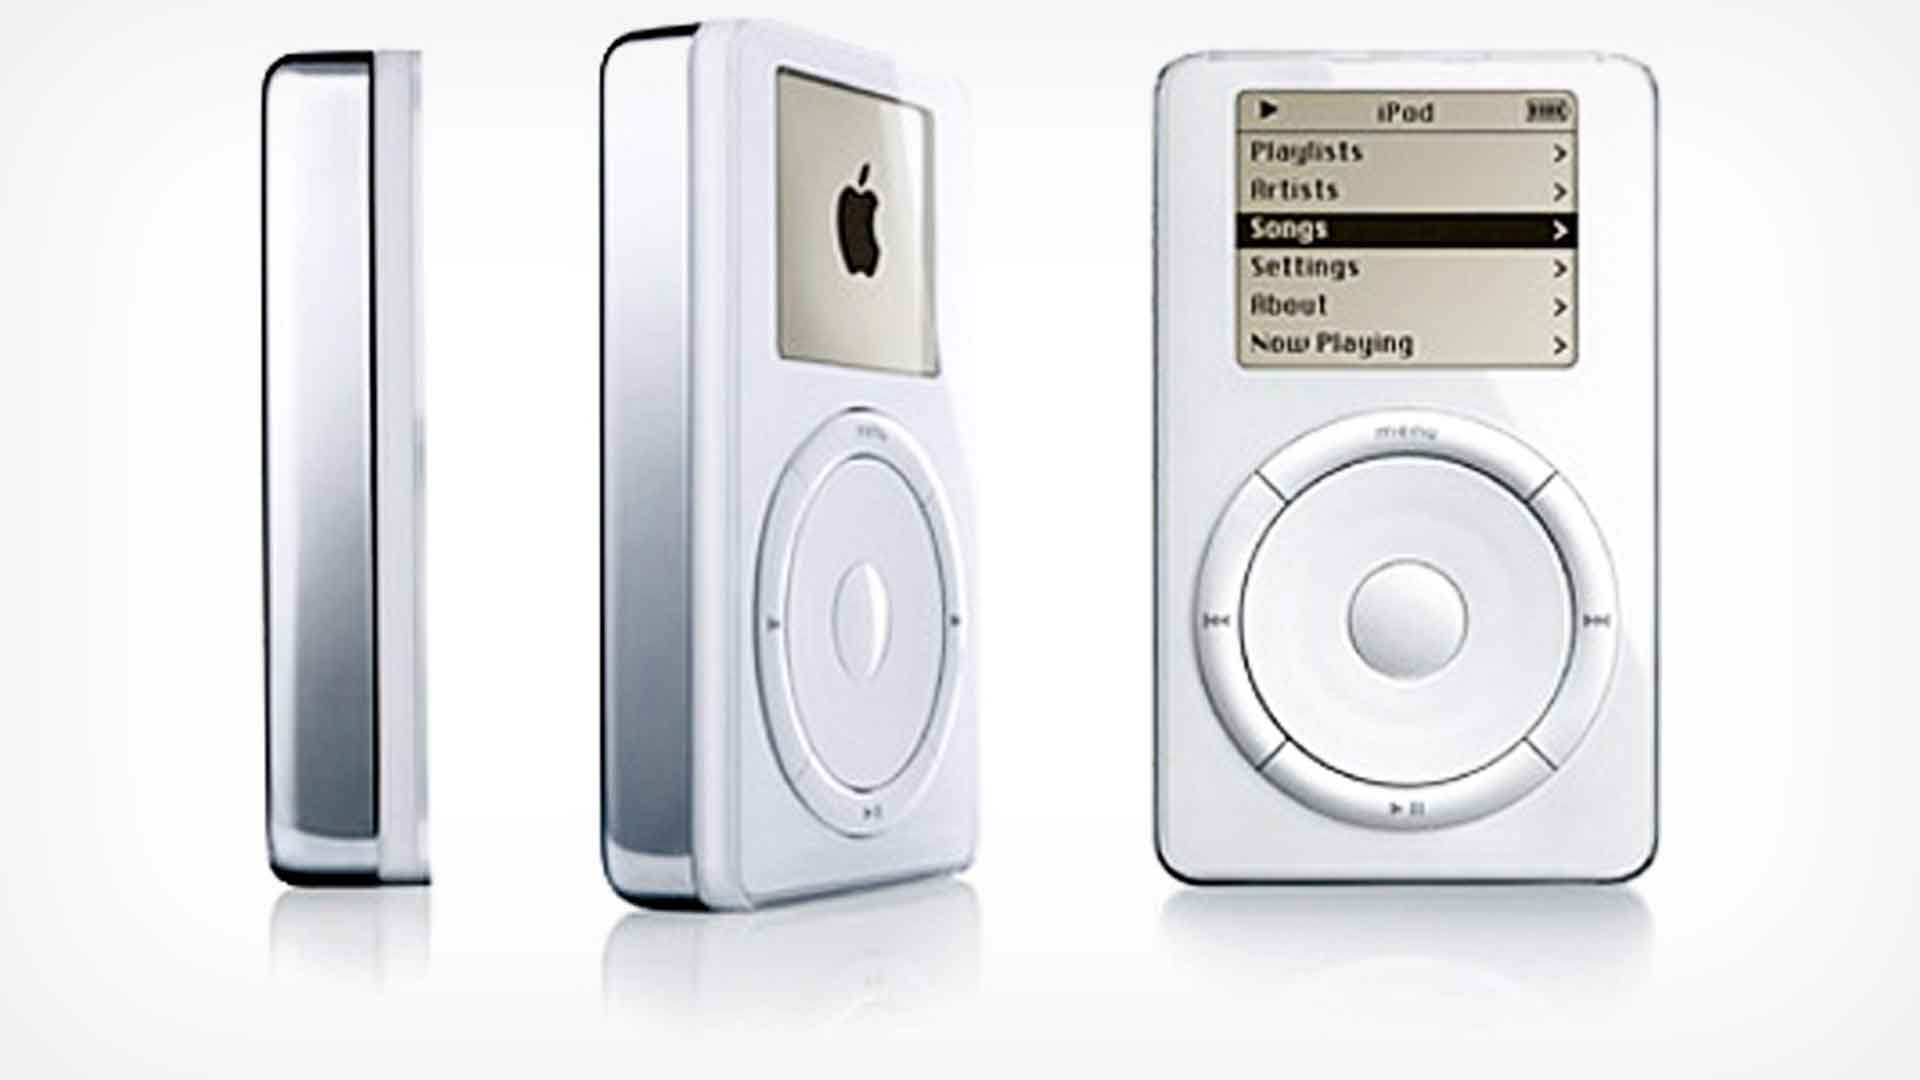 More Than A Music Player: How To Use The iPod In New And Creative Ways